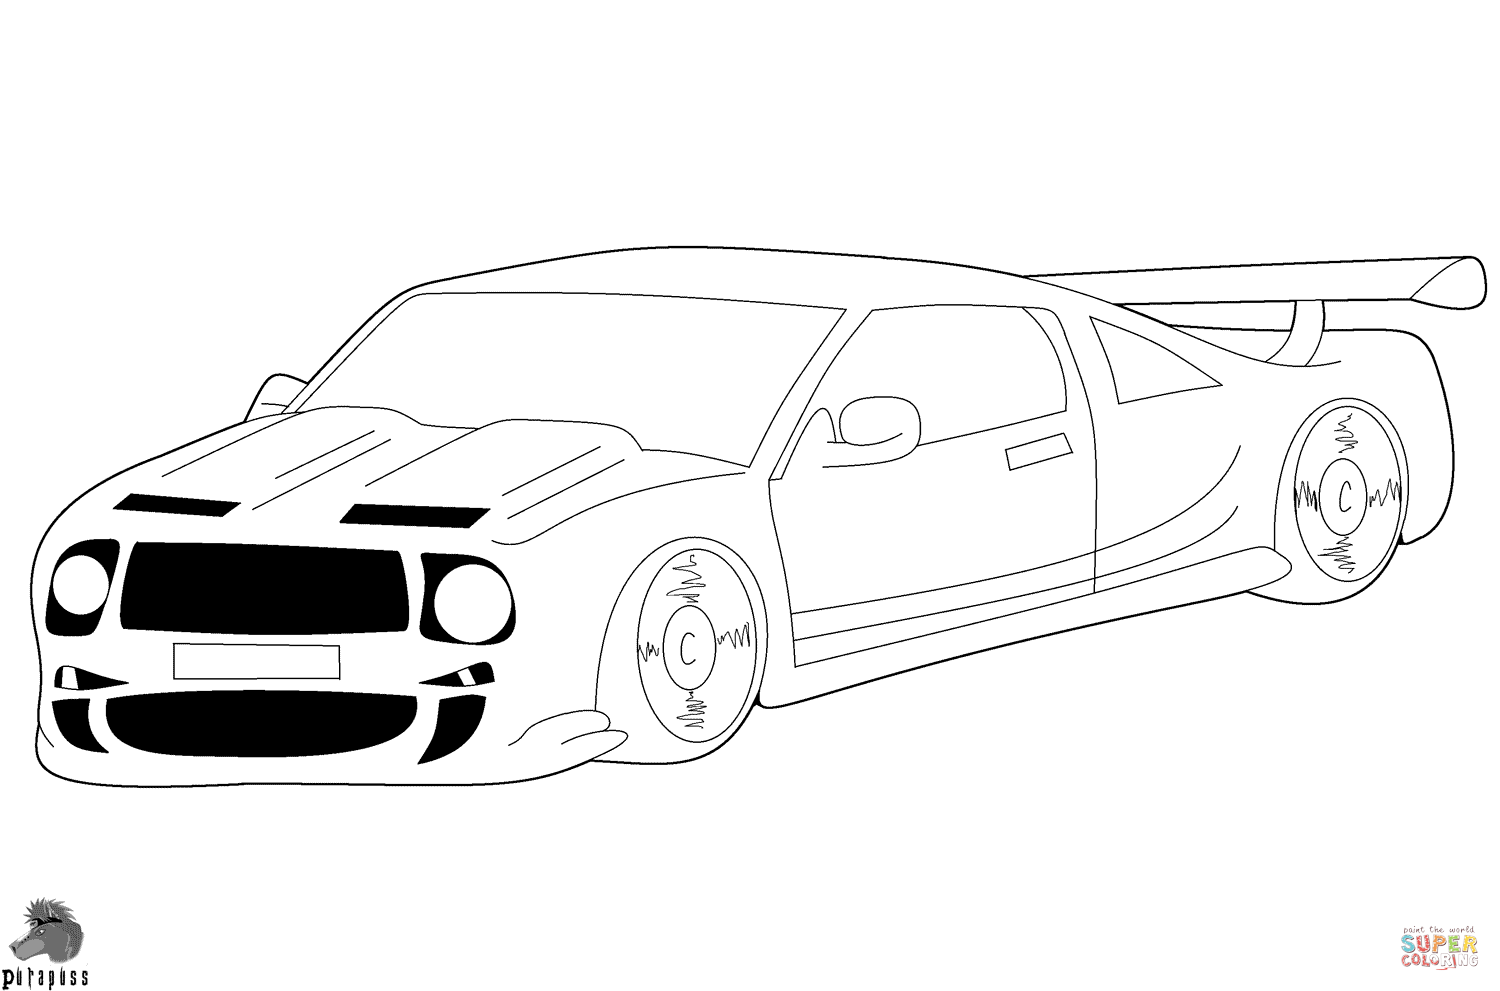 Race Car coloring page | Free Printable Coloring Pages